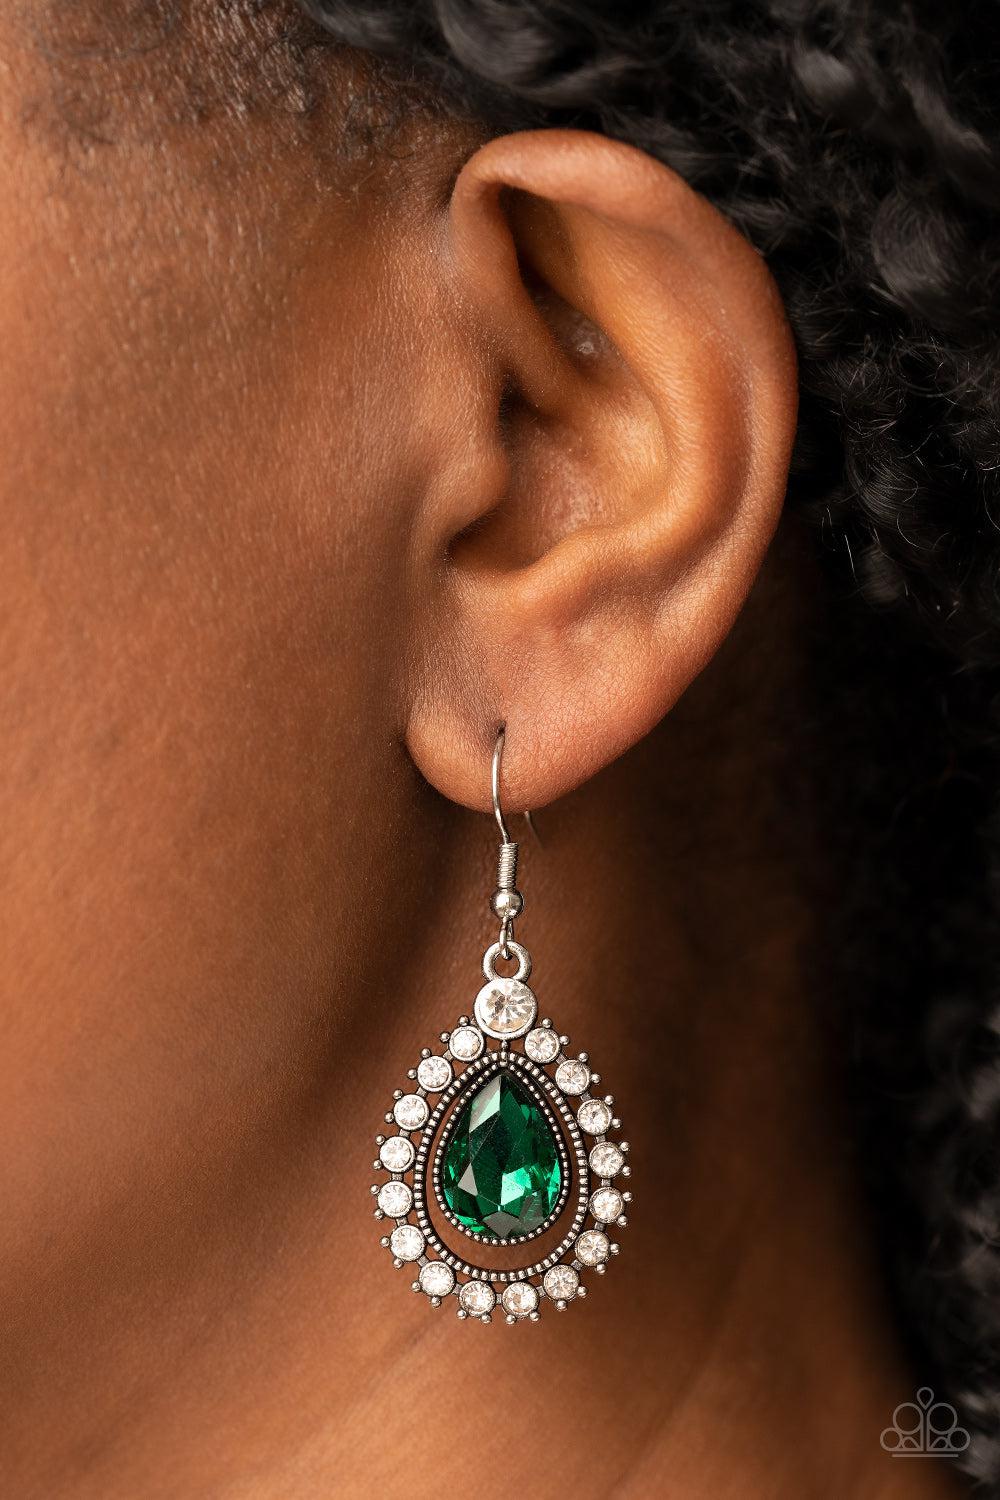 Divinely Duchess Green Rhinestone Earrings - Paparazzi Accessories- lightbox - CarasShop.com - $5 Jewelry by Cara Jewels